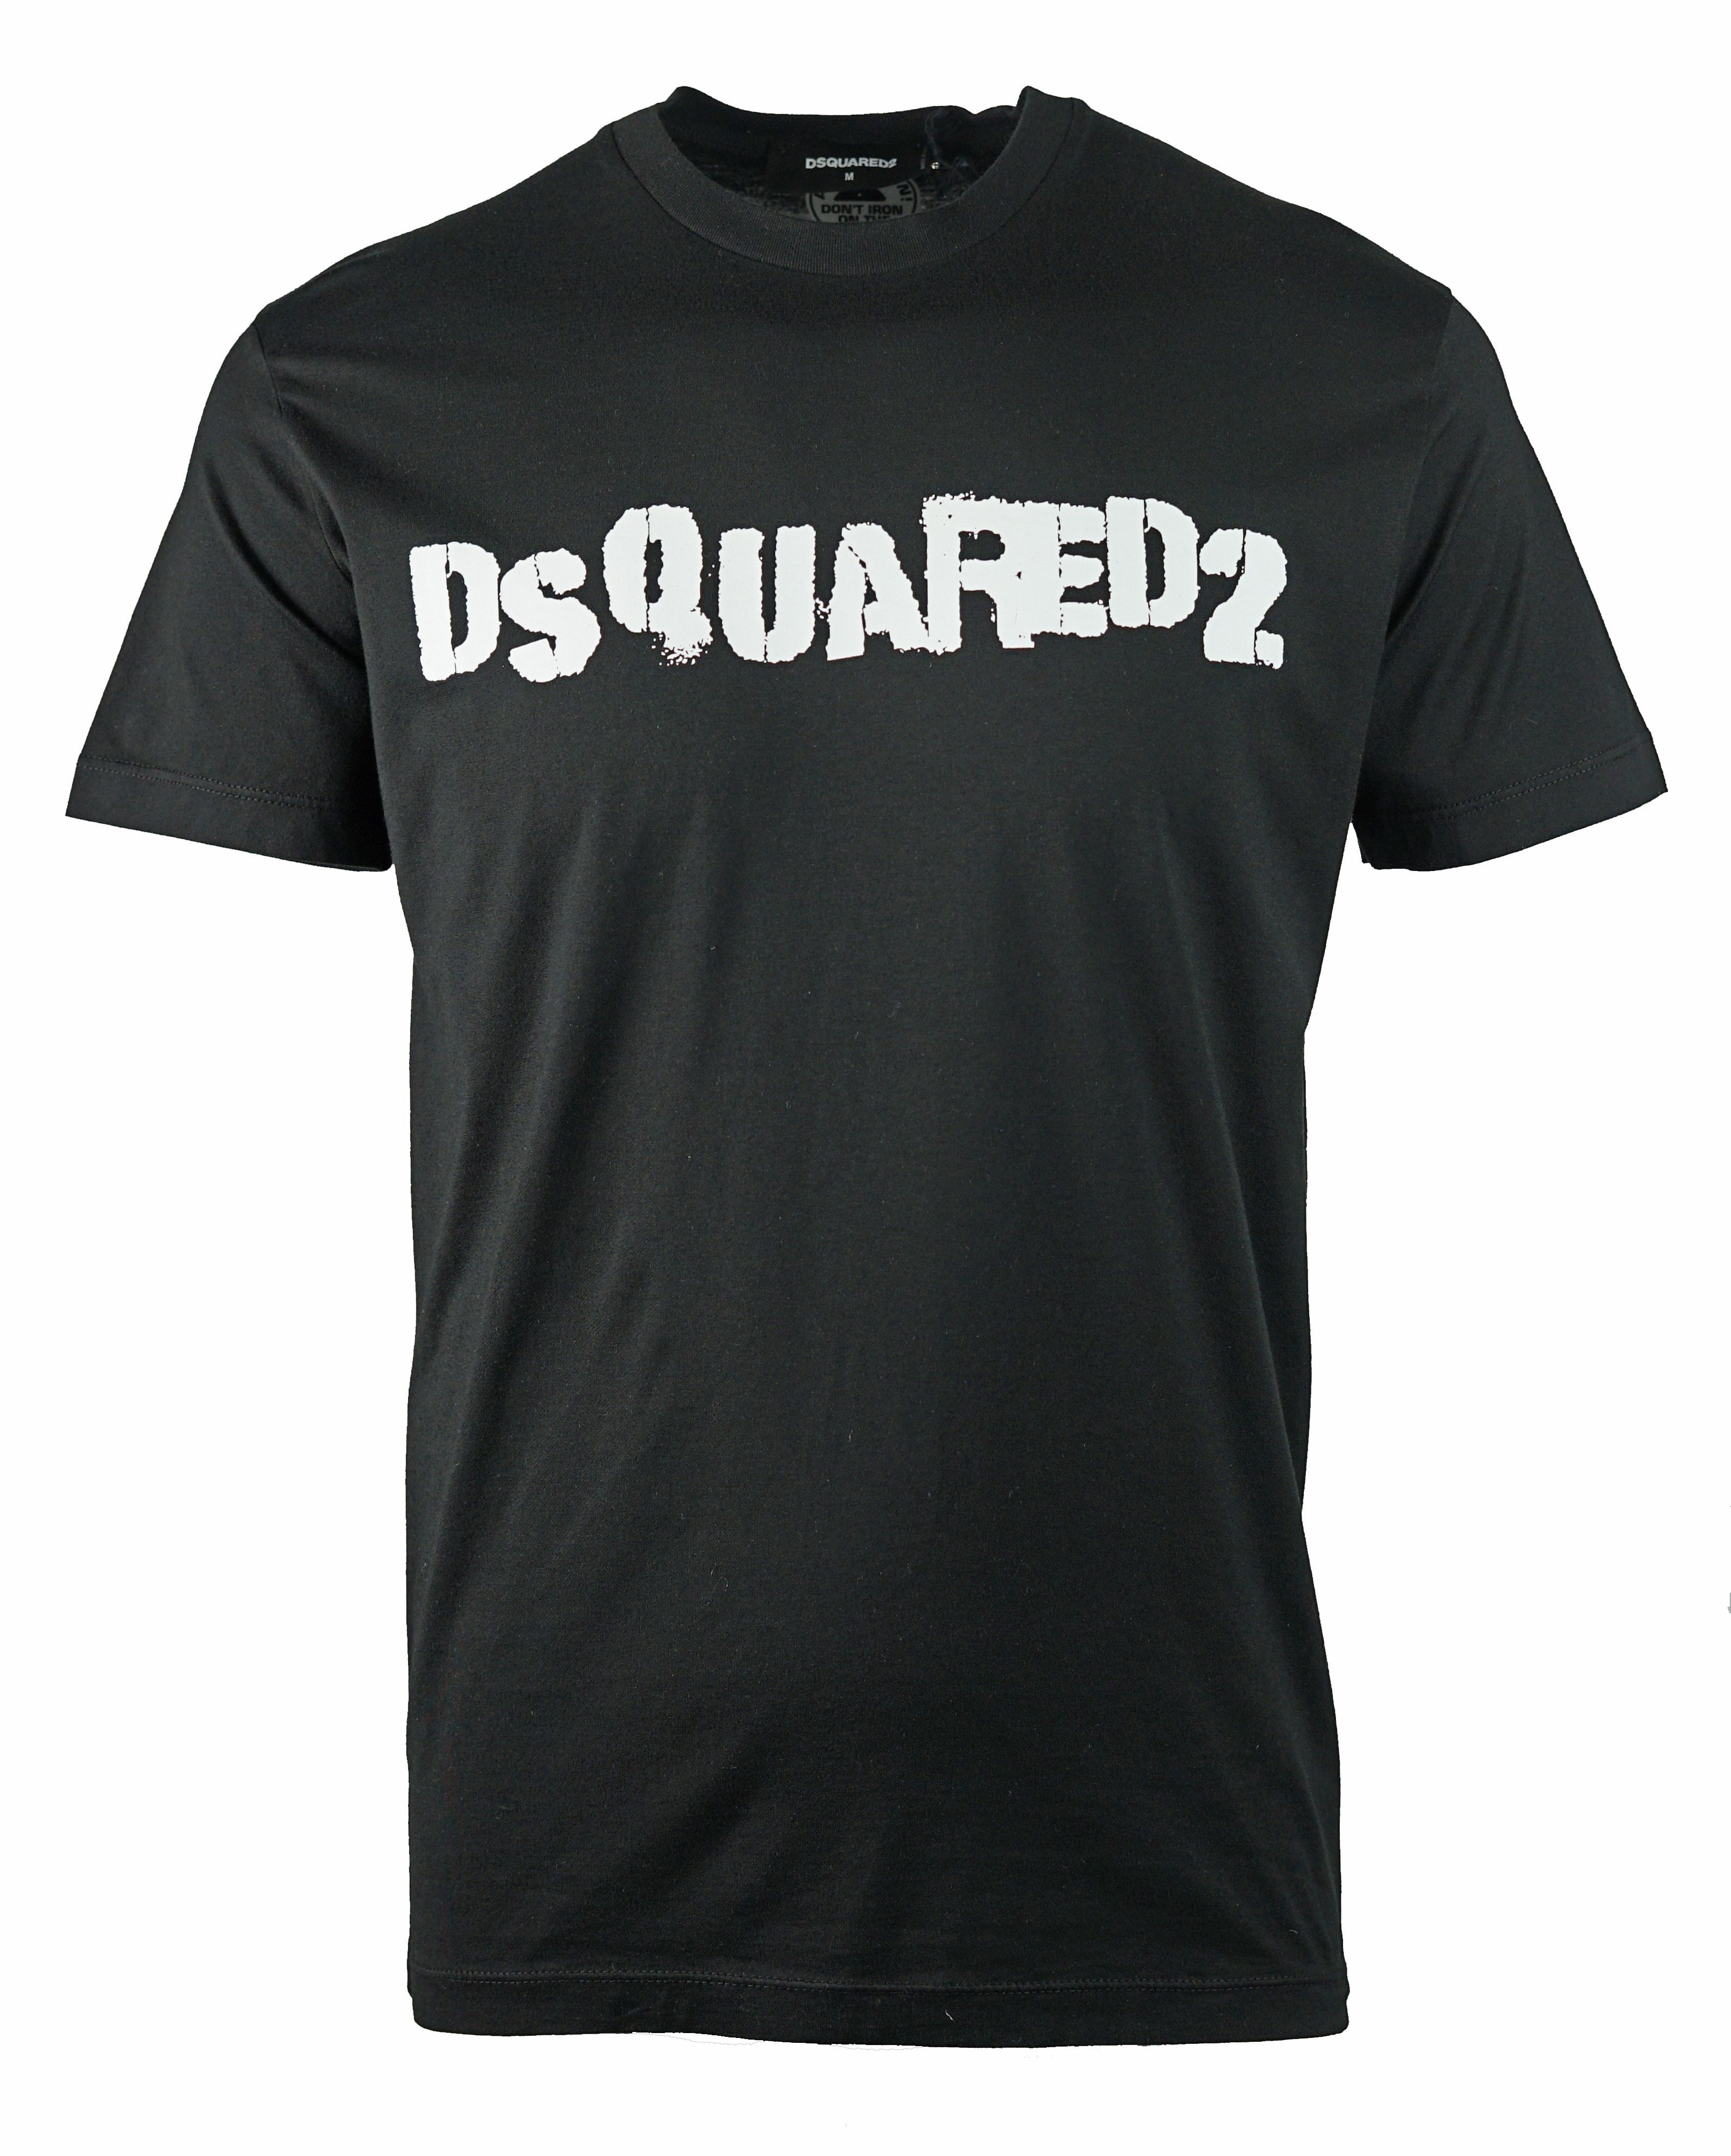 DSquared2 S74GD0494 S22427 900 T-Shirt. Round Crew Neck Tee. 100% Cotton. Short Sleeves. Large Branded Print On The Front. Ribbed Neck and Sleeve Endings